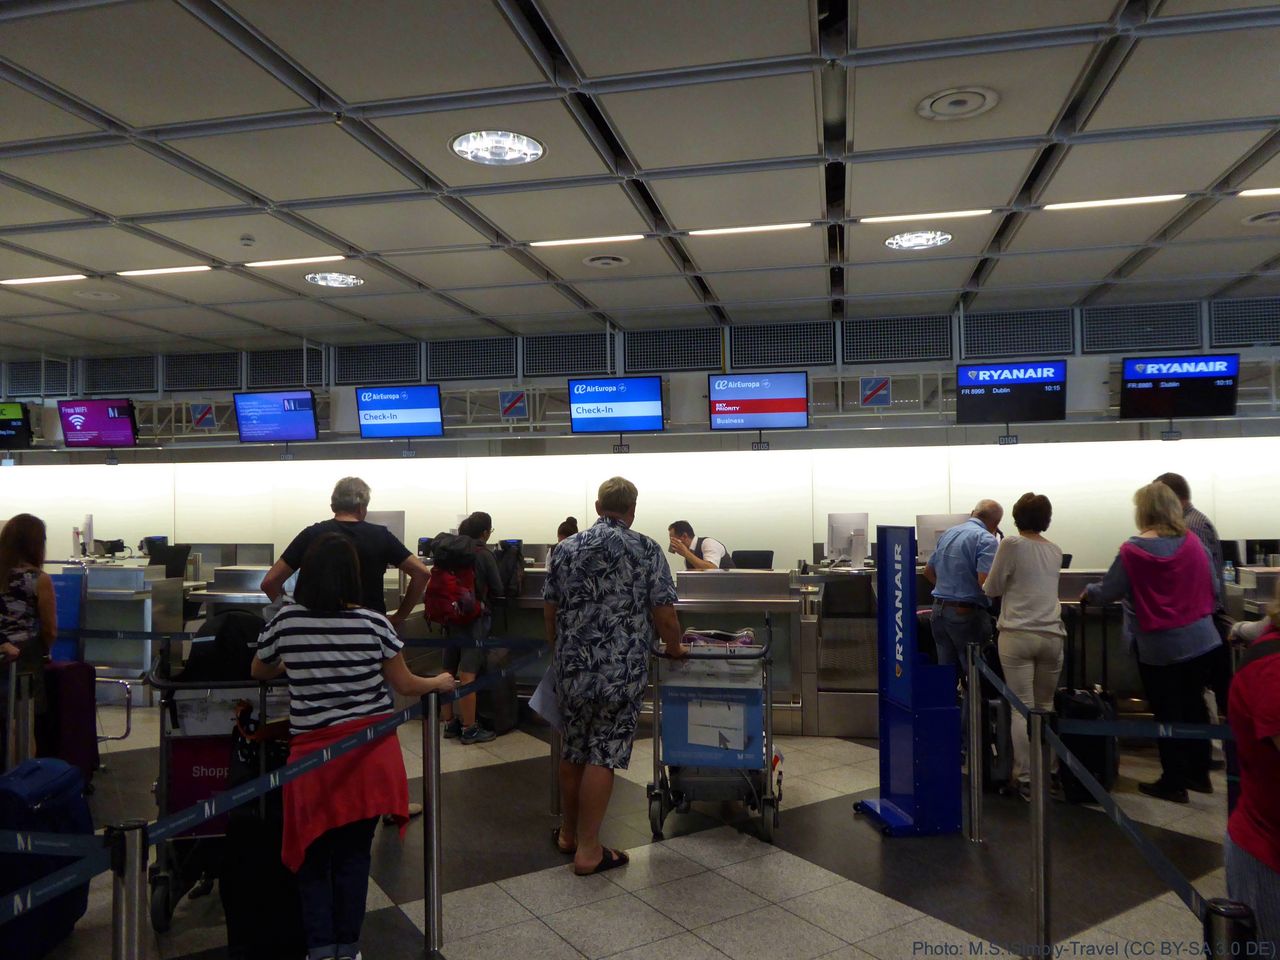 Review of Air Europa flight from Munich to Madrid